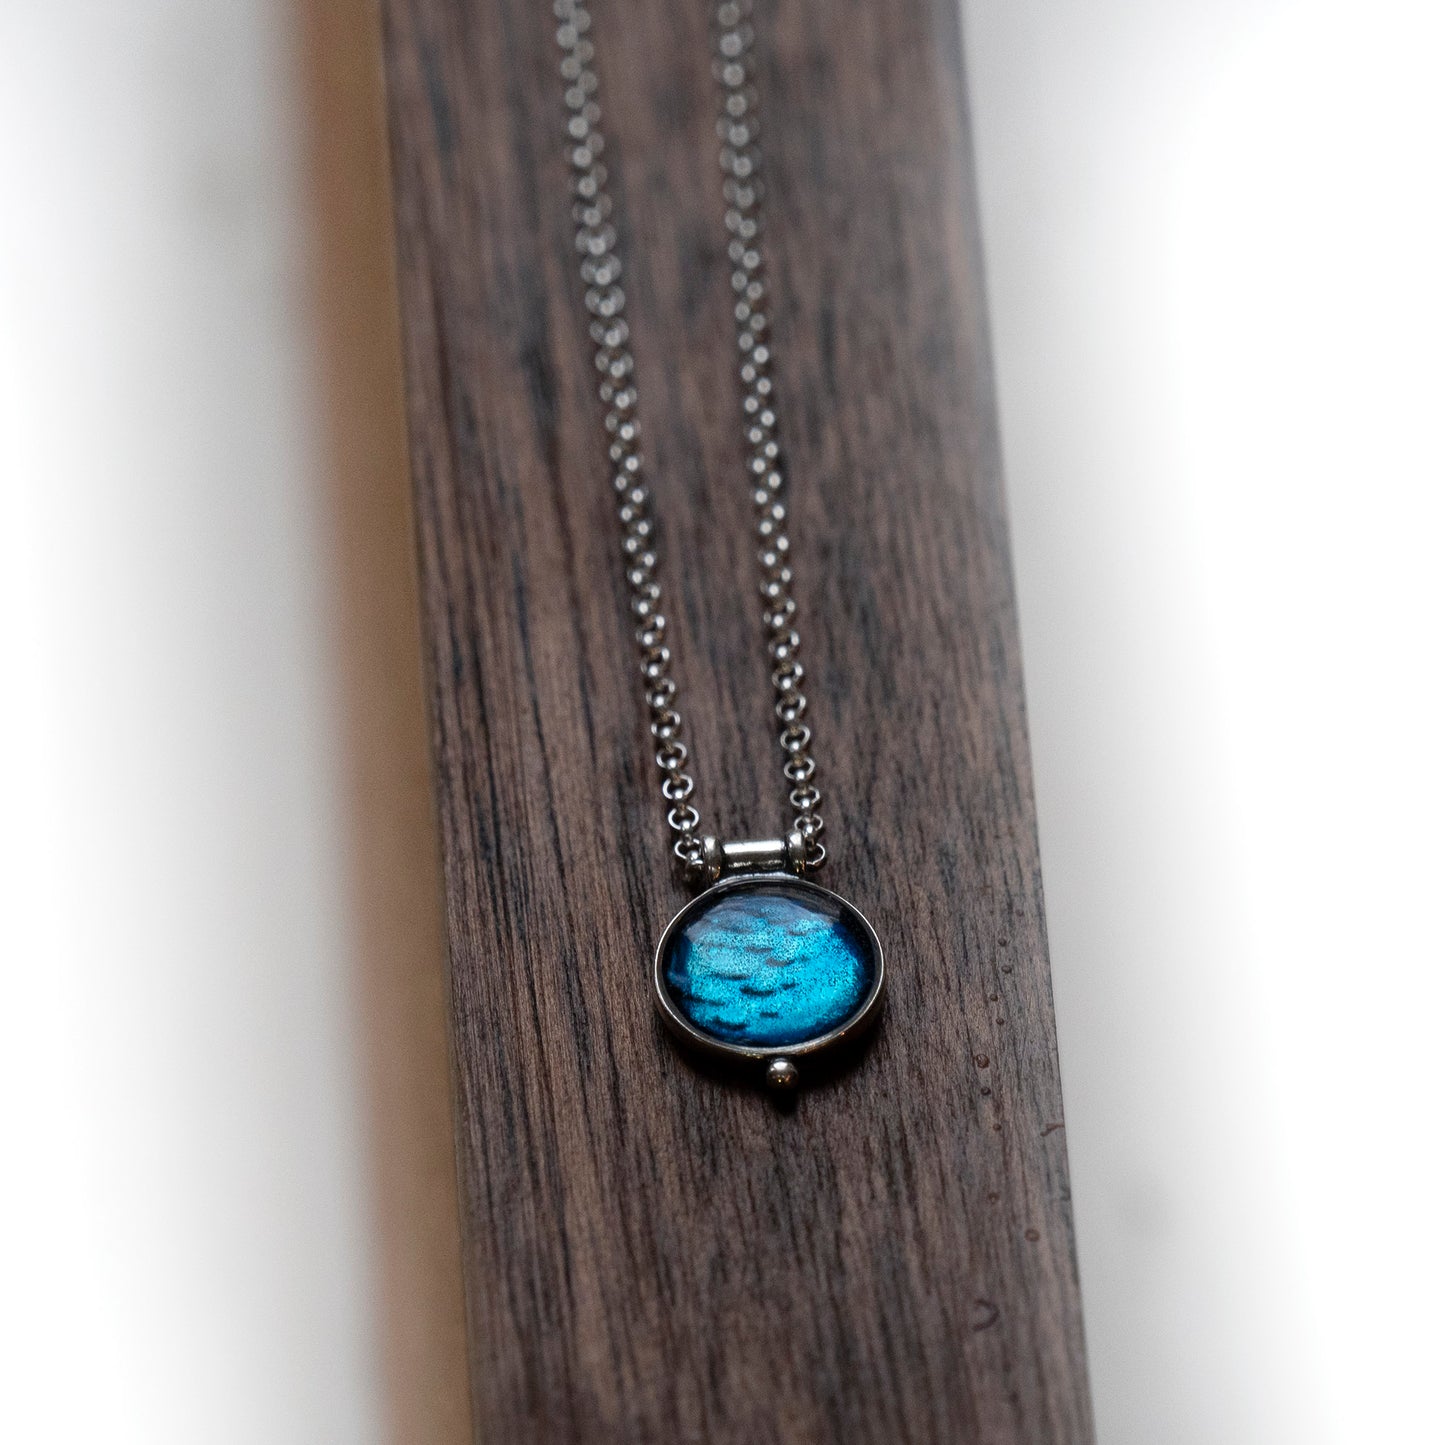 STELLER'S JAY FEATHERS - Miniature Pendant, Silver and Resin